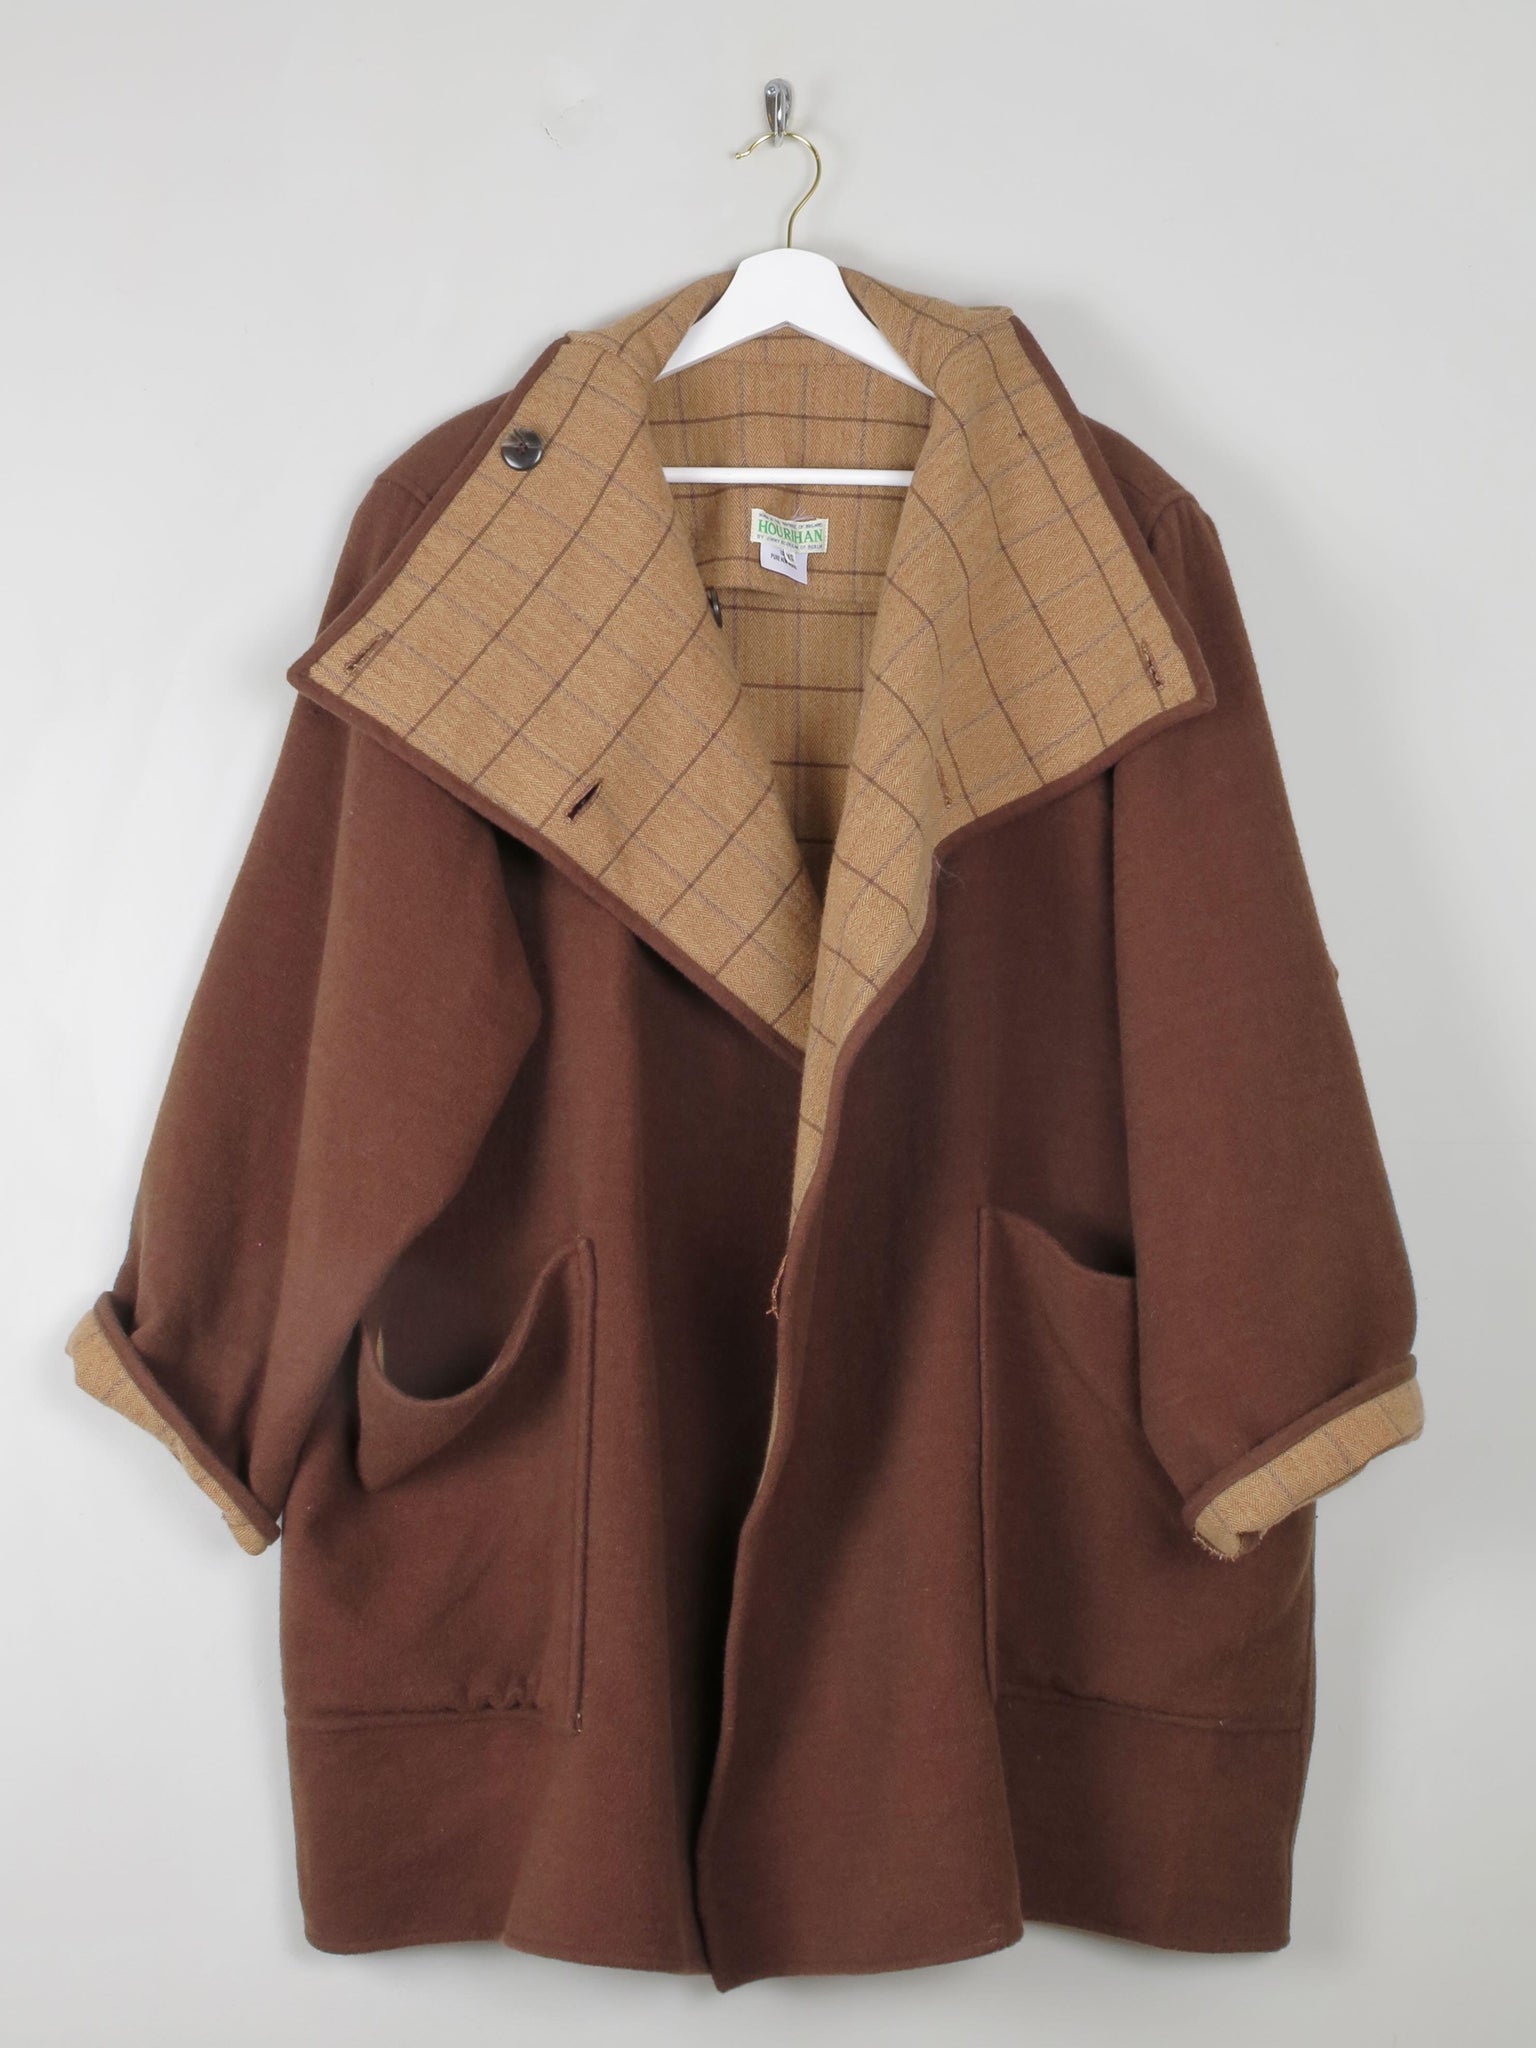 Women's Vintage Wool Coat By Hourihan L/XL - The Harlequin